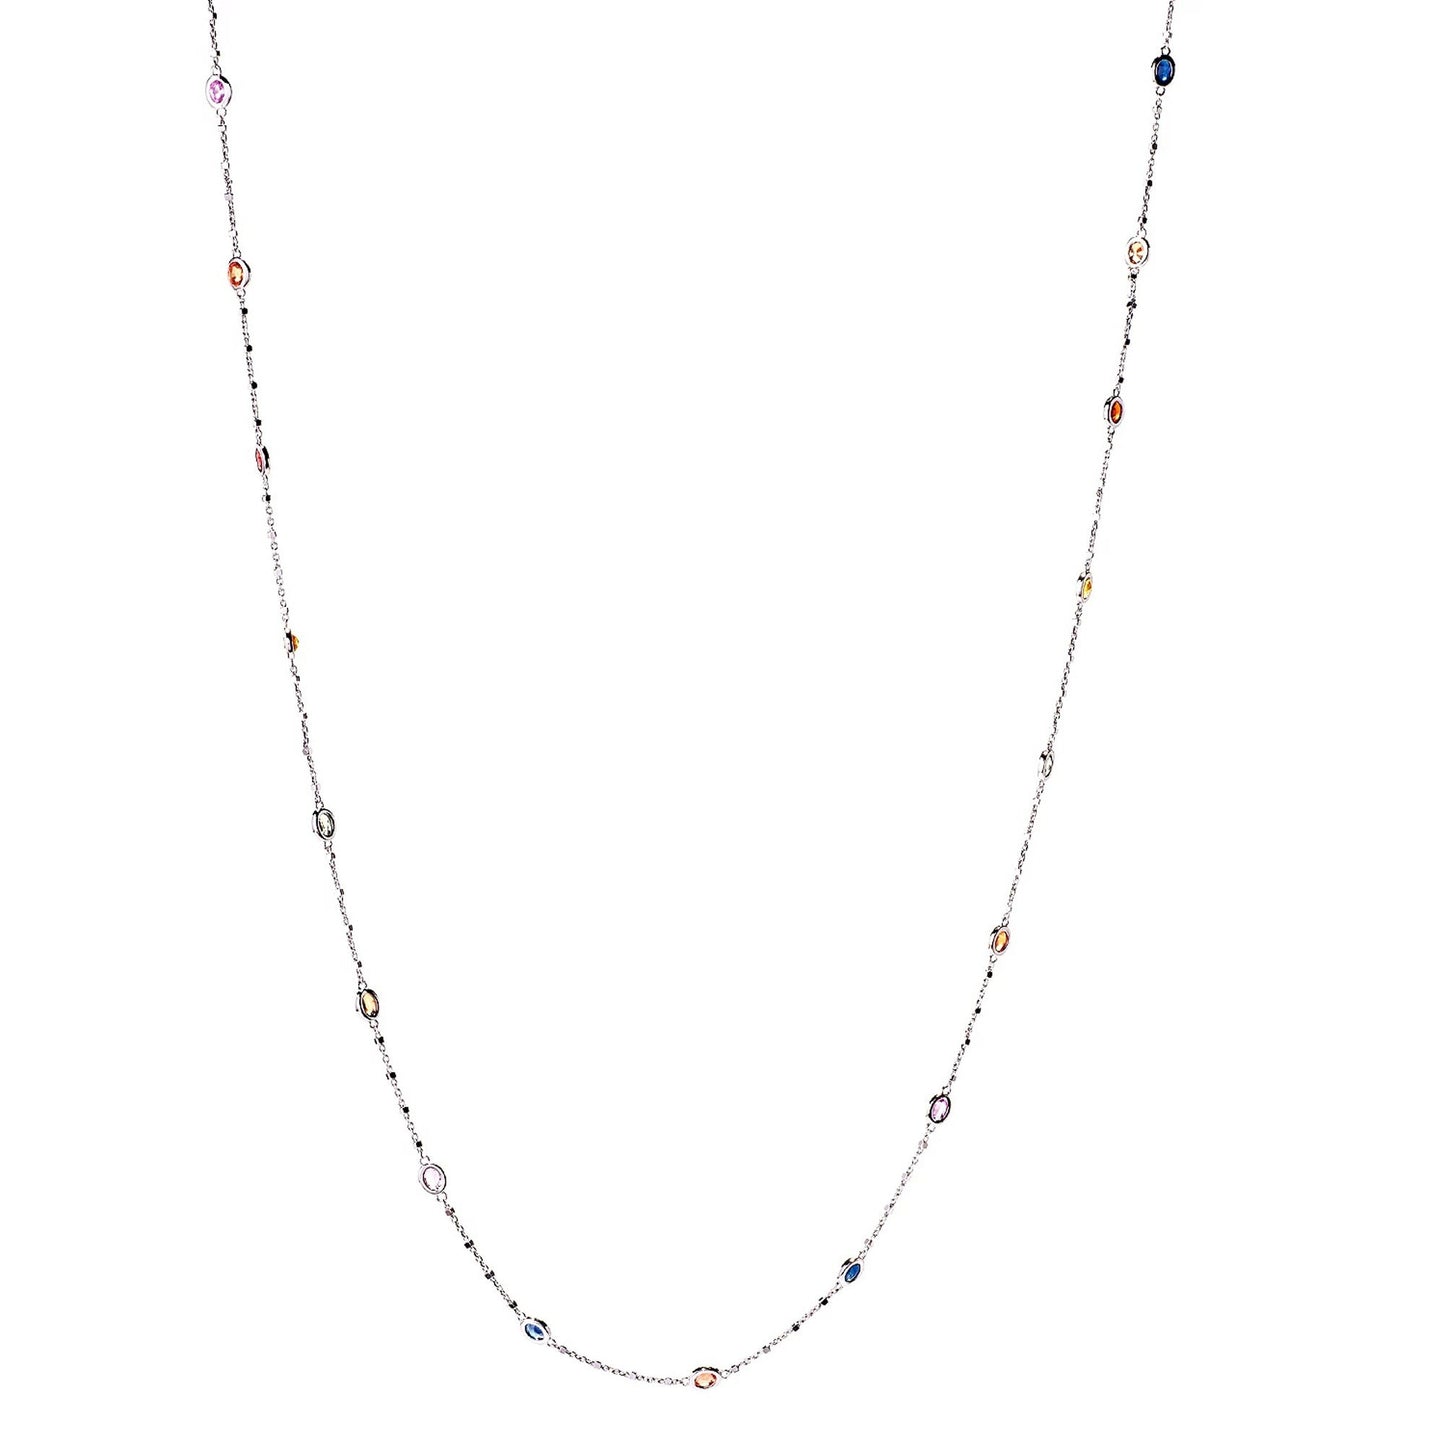 Multi Sapphire Gemstone Necklace, 925 Sterling Silver Necklace, Women Long Necklace 18",24",32 Inches, Anniversary Gift, Gift For Her